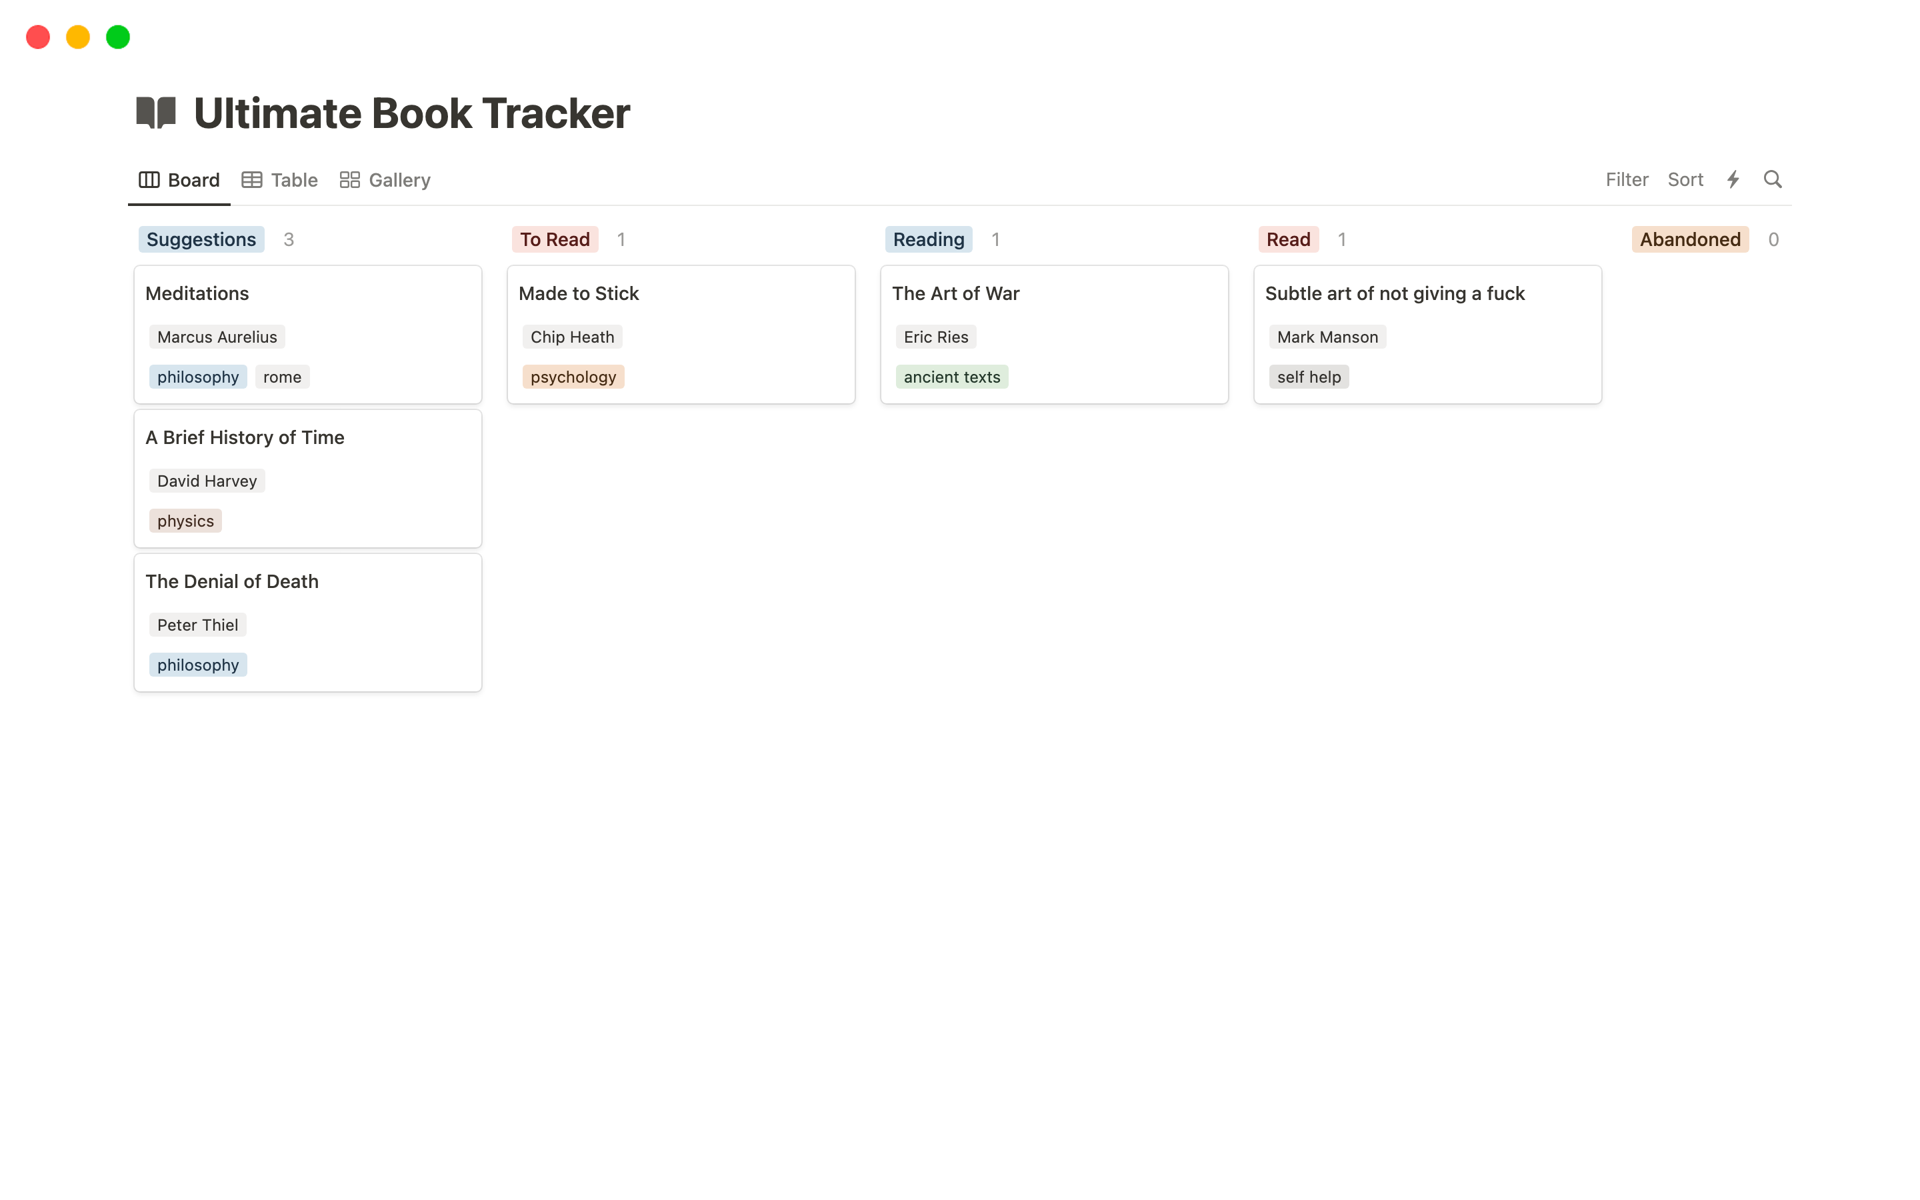 Track your reading journey effortlessly with this Book Tracking Template, featuring customizable fields for book titles, authors, genres, reading status, ratings, and personal reflections, all organized in a visually pleasing and user-friendly layout.